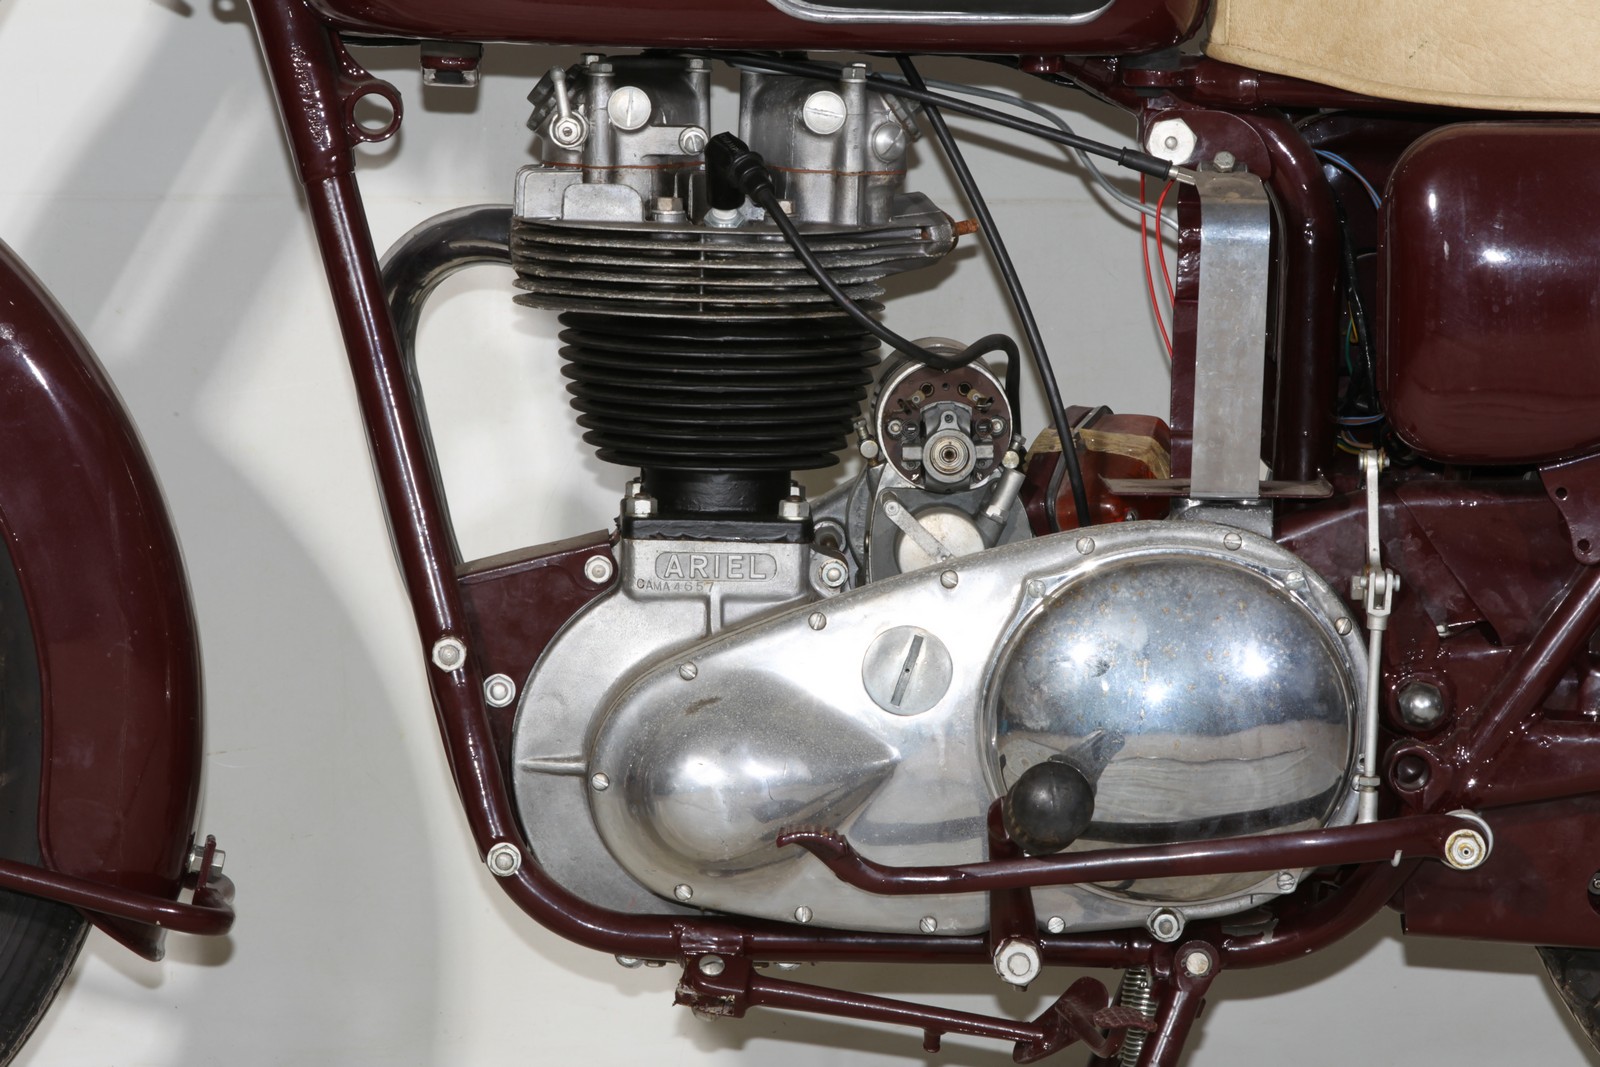 1958 Ariel Red Hunter NH 350cc OHV - Image 5 of 6